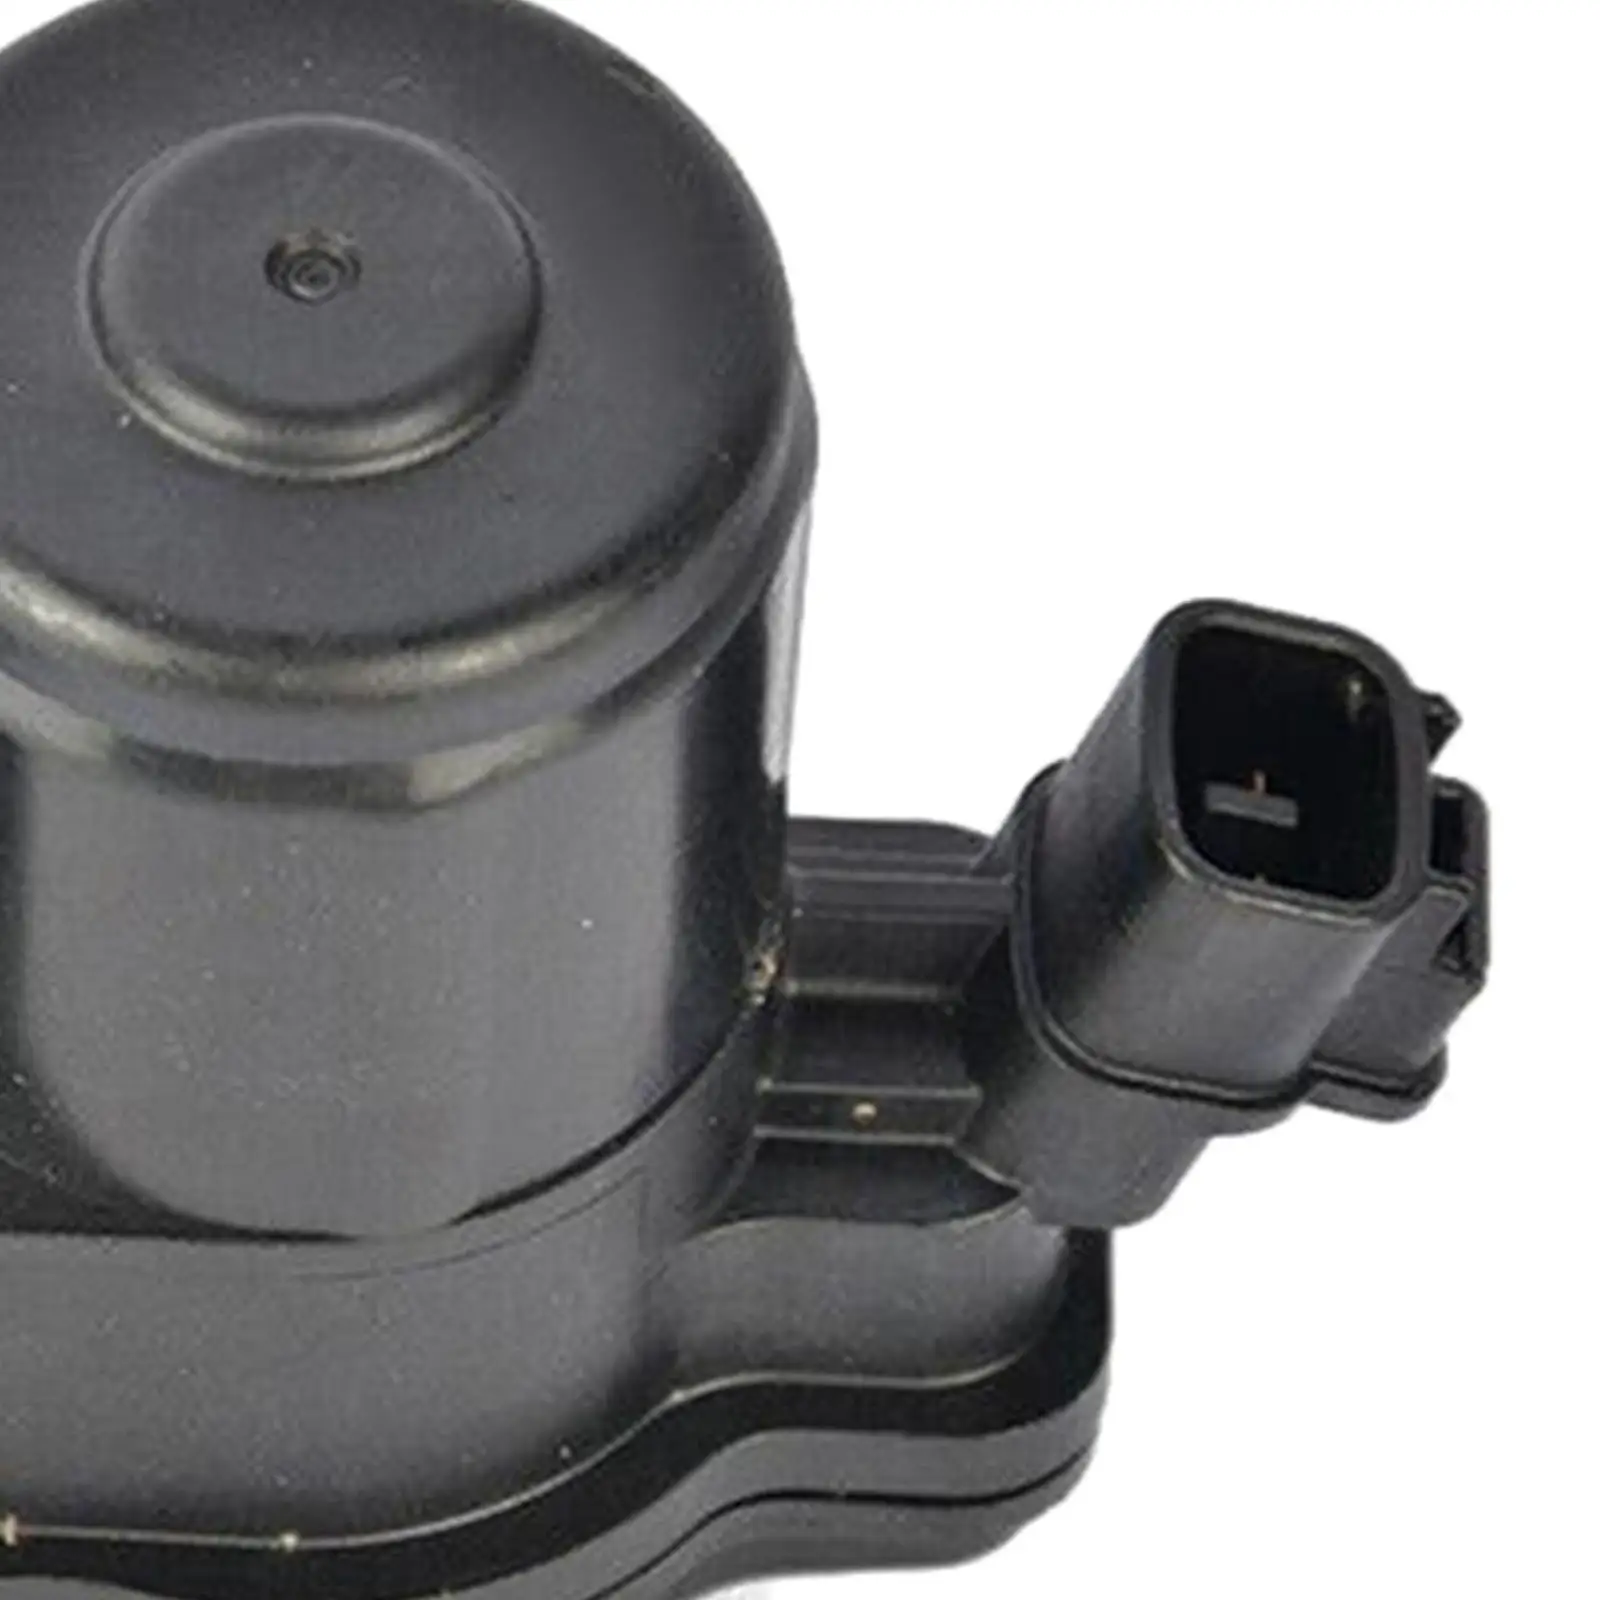 Parking Brake Actuator Assembly replacement for toyota Avalon Venza